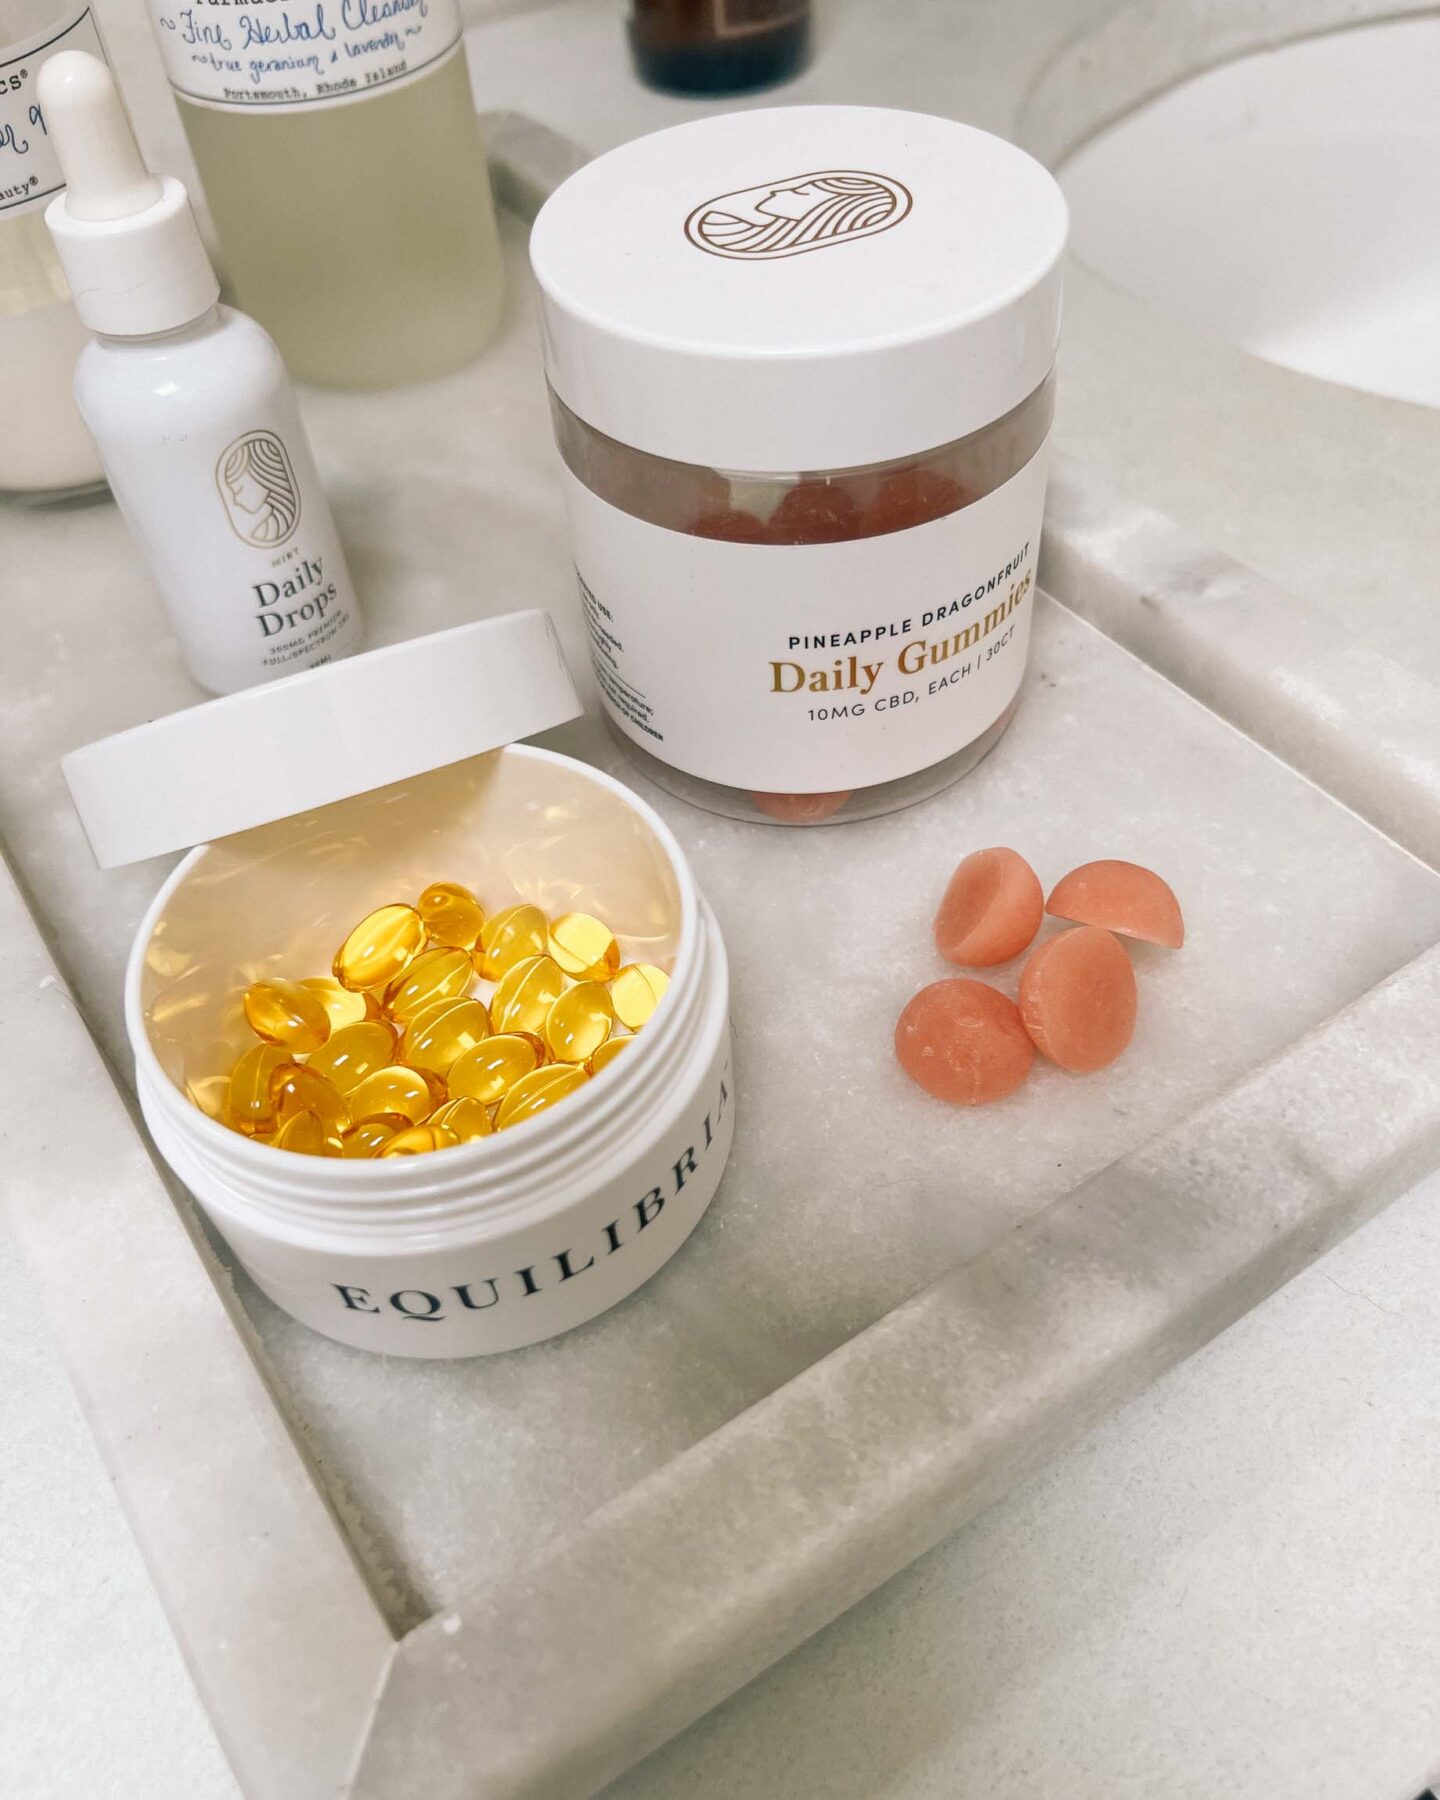 My CBD routine - Equilibria gummies, softgel and daily drops